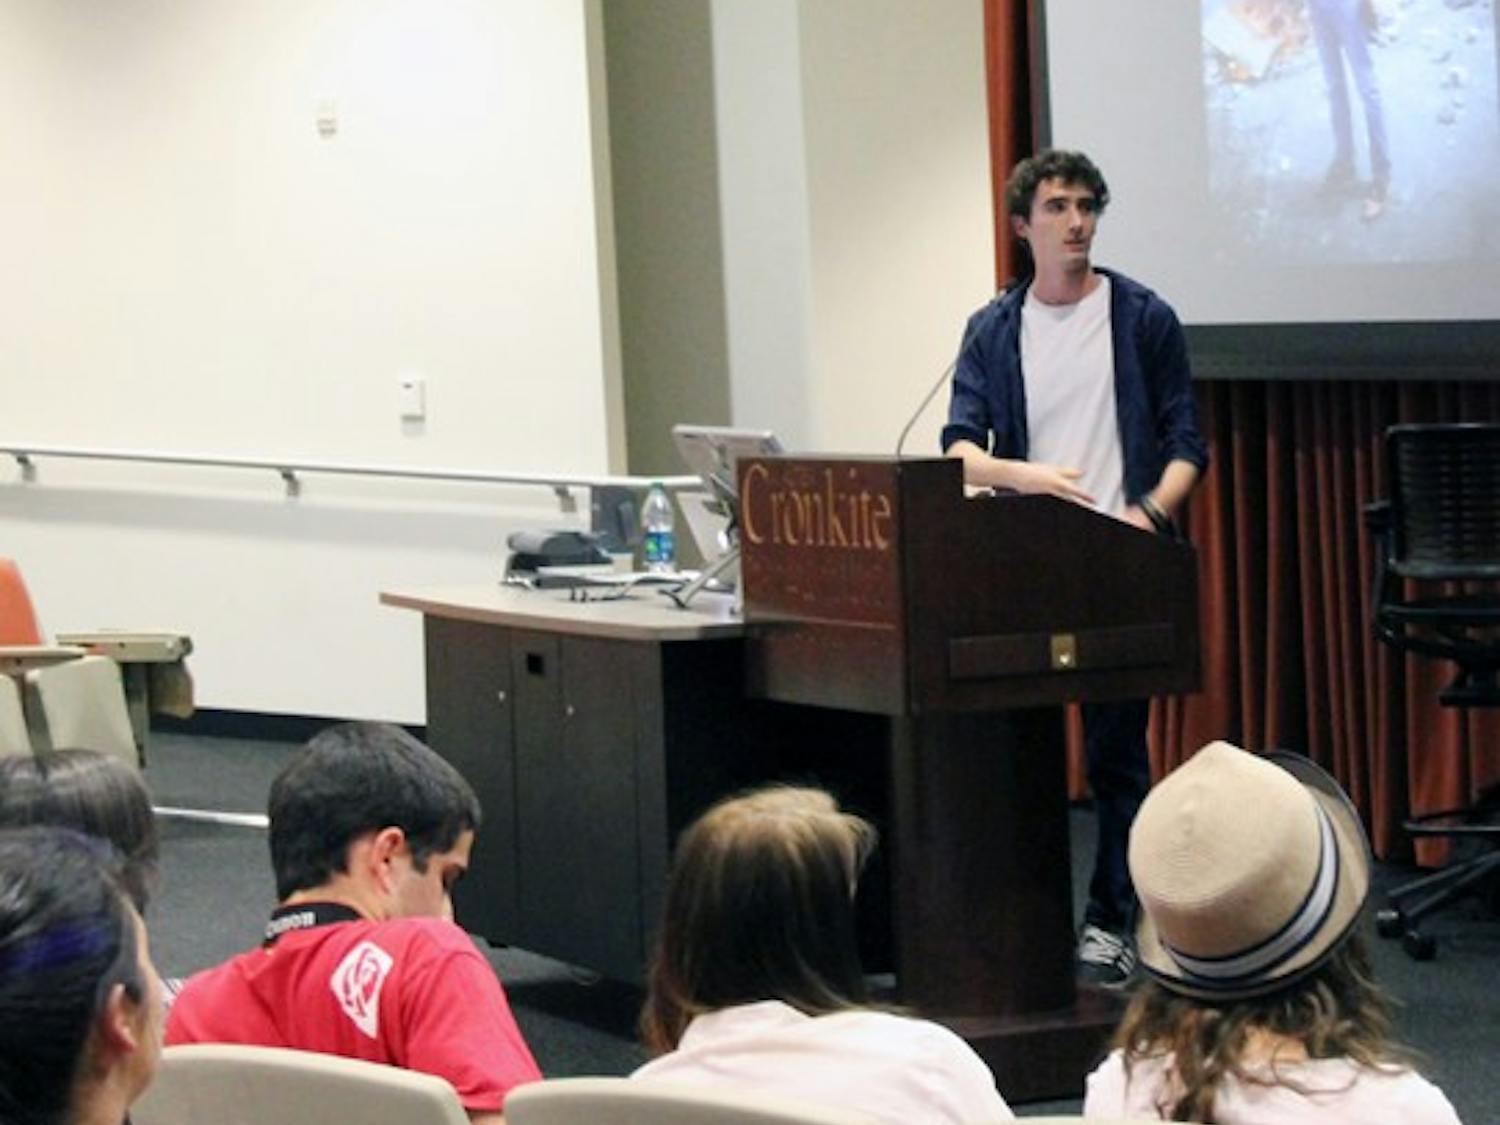 Italian photojournalist Ruben Salvadori speaks to students about the effects of the presence of photographers in situations at the Downtown campus Monday night. (Photo by Diana Lustig)